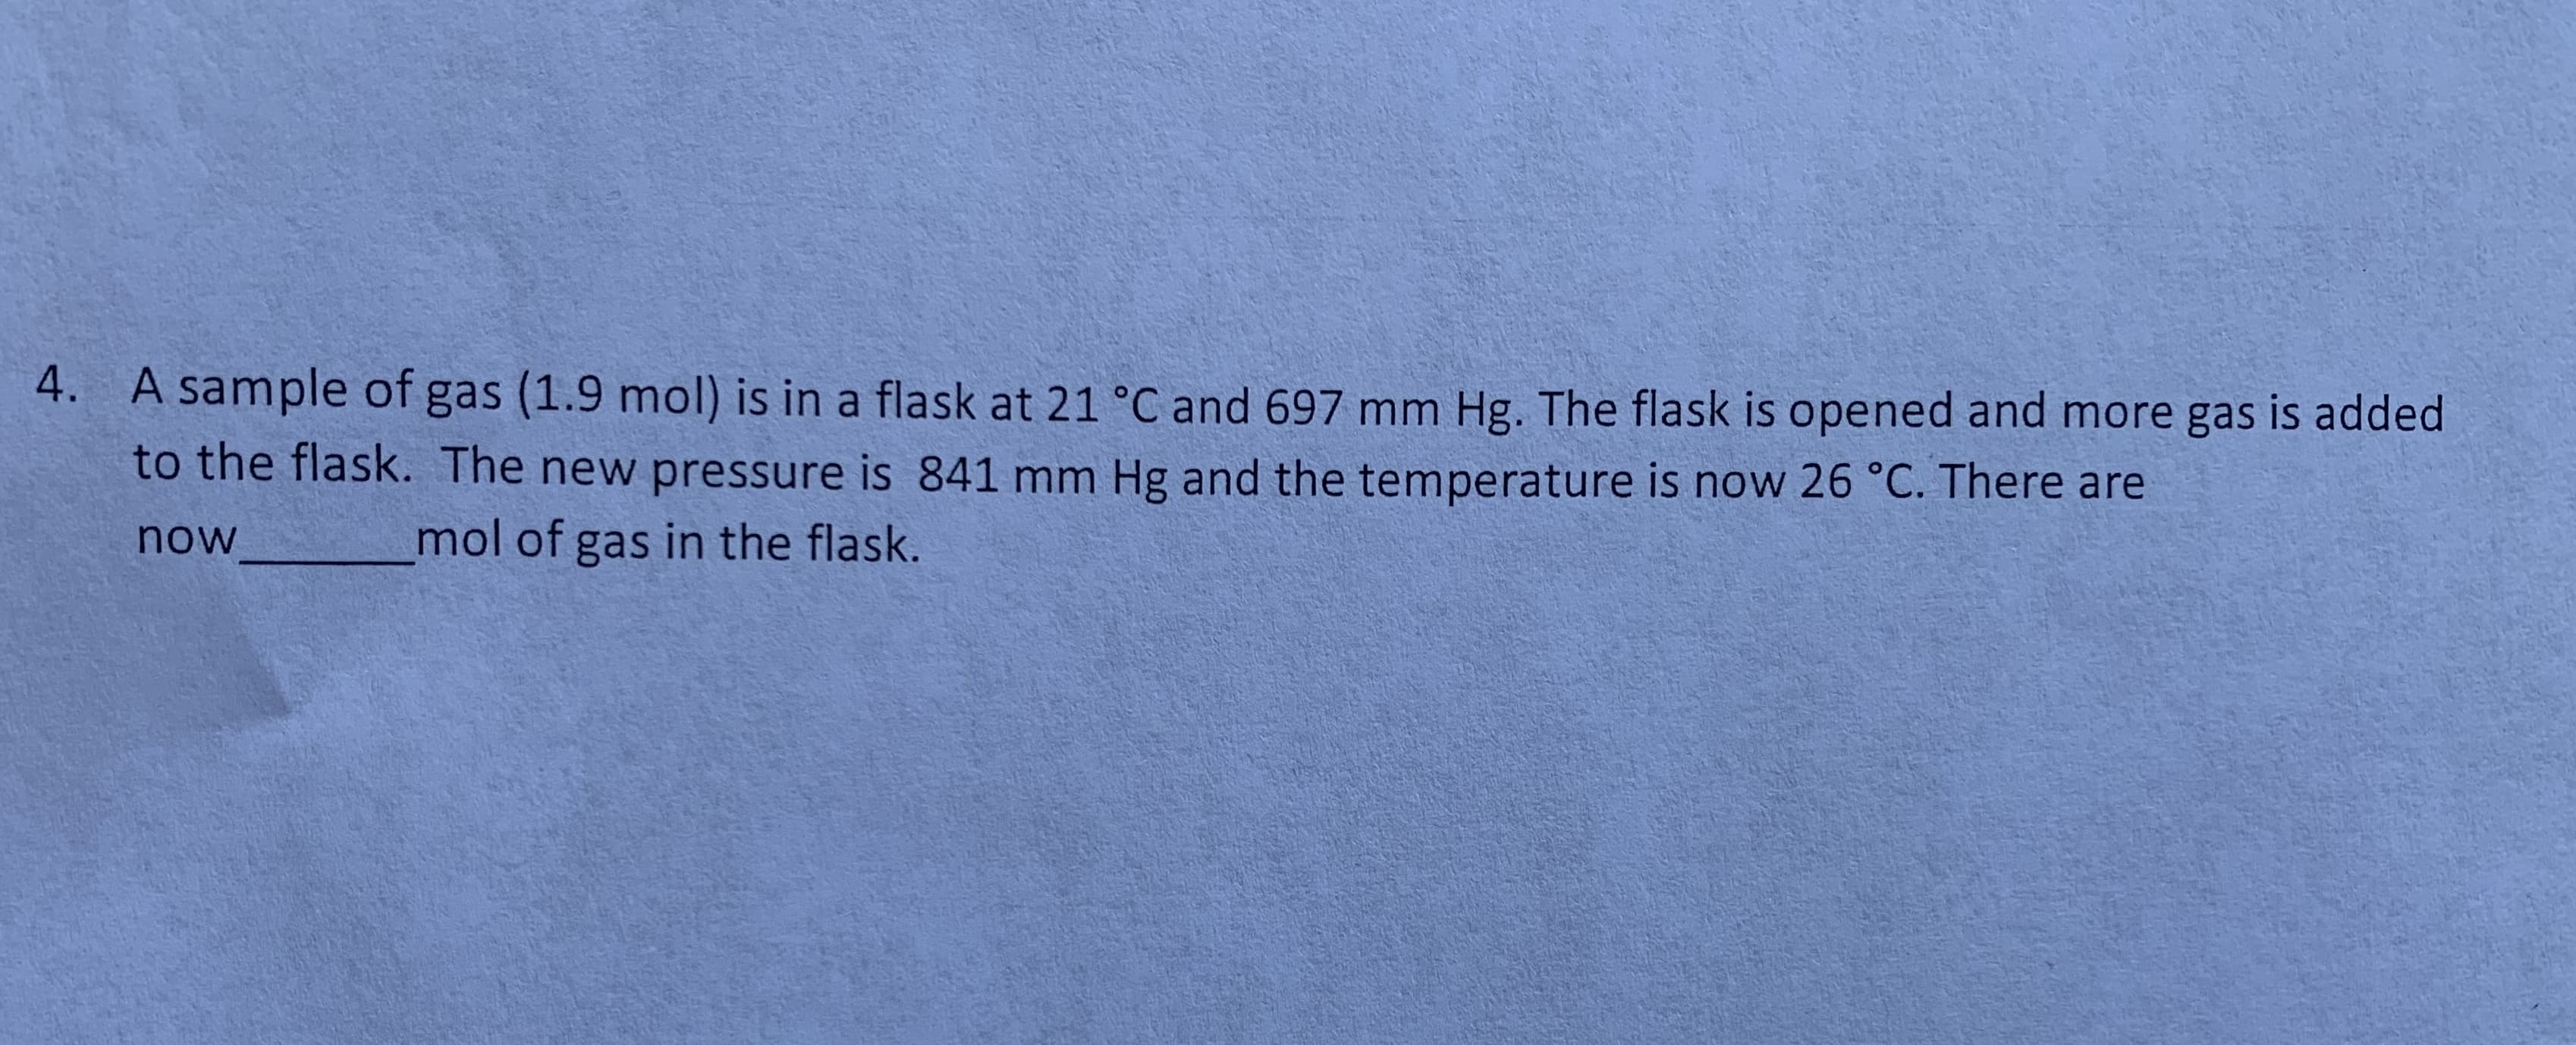 4.
A sample of gas (1.9 mol) is in a flask at 21 °C and 697 mm Hg. The flask is opened and more gas is added
to the flask. The new pressure is 841 mm Hg and the temperature is now 26 °C. There are
mol of gas in the flask.
now
